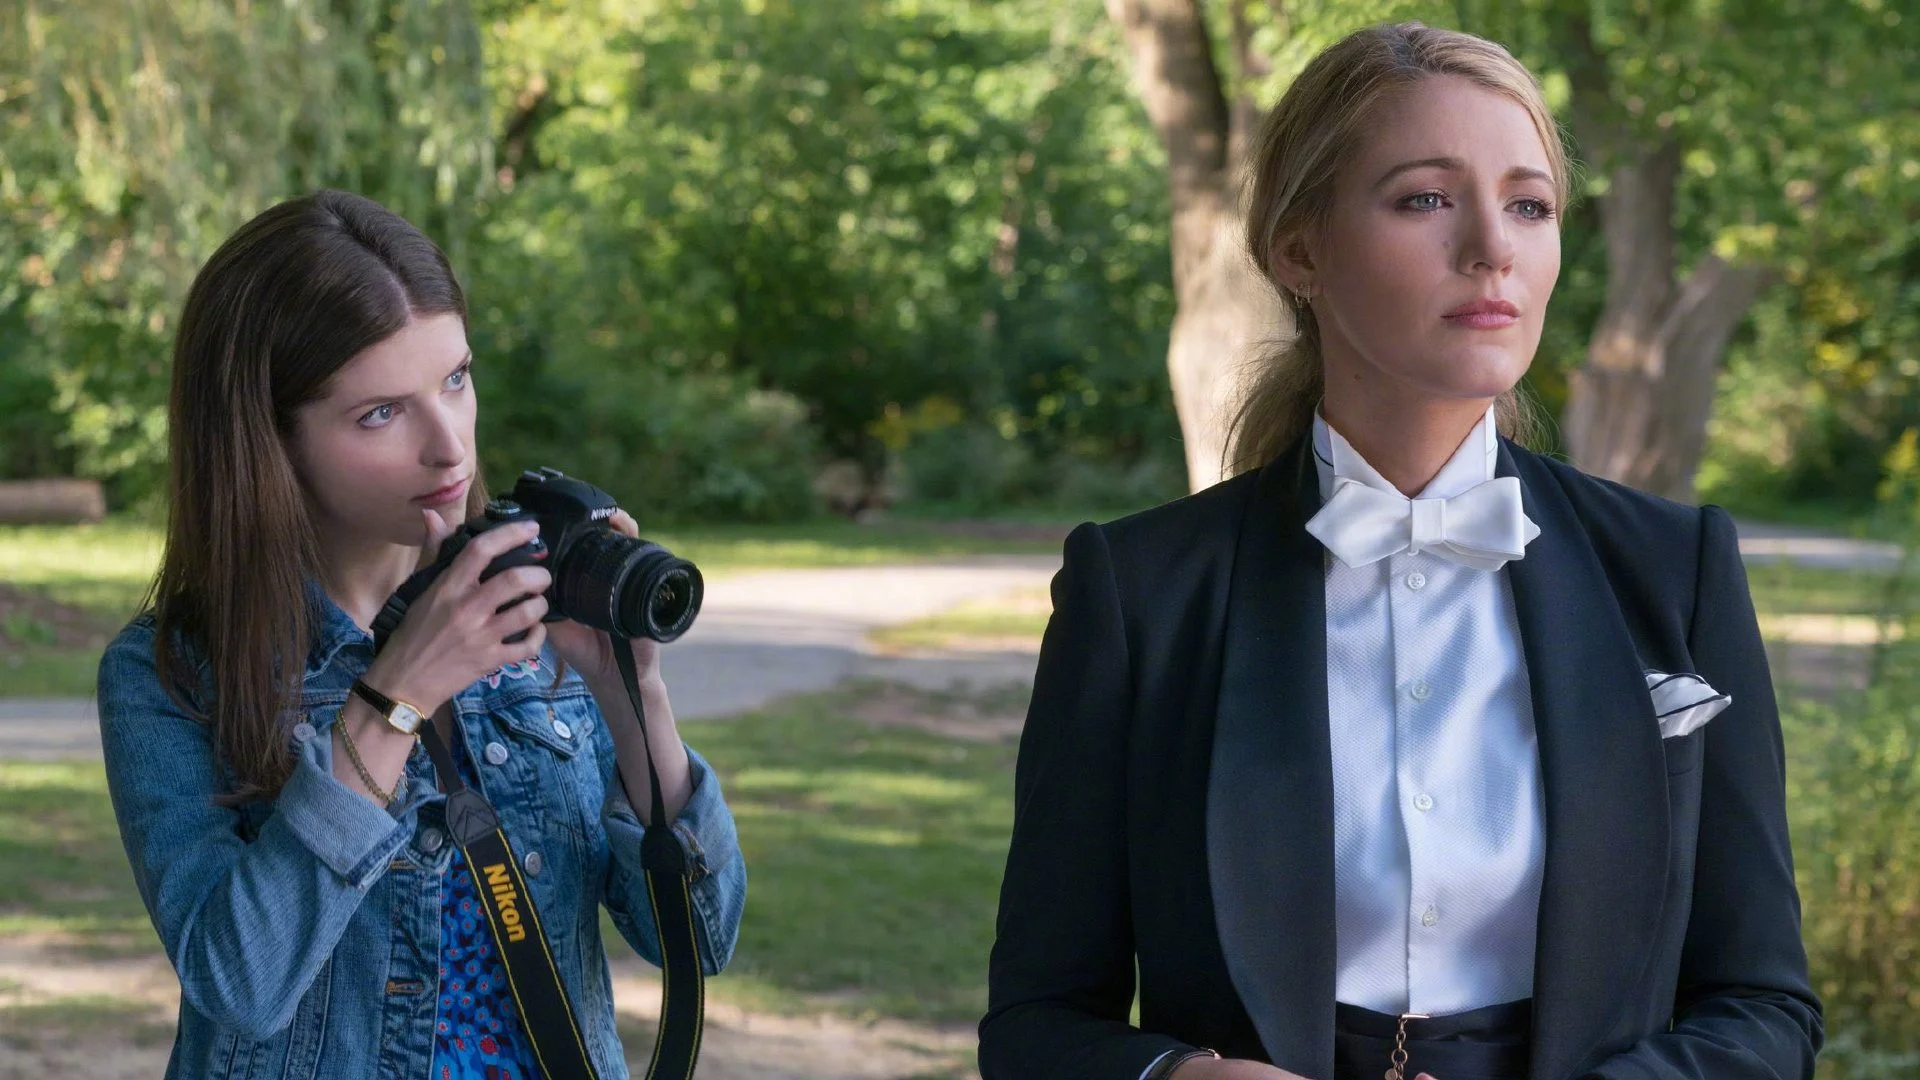 'A Simple Favor‎' will be filmed for a sequel, with Anna Kendrick and Blake Lively returning